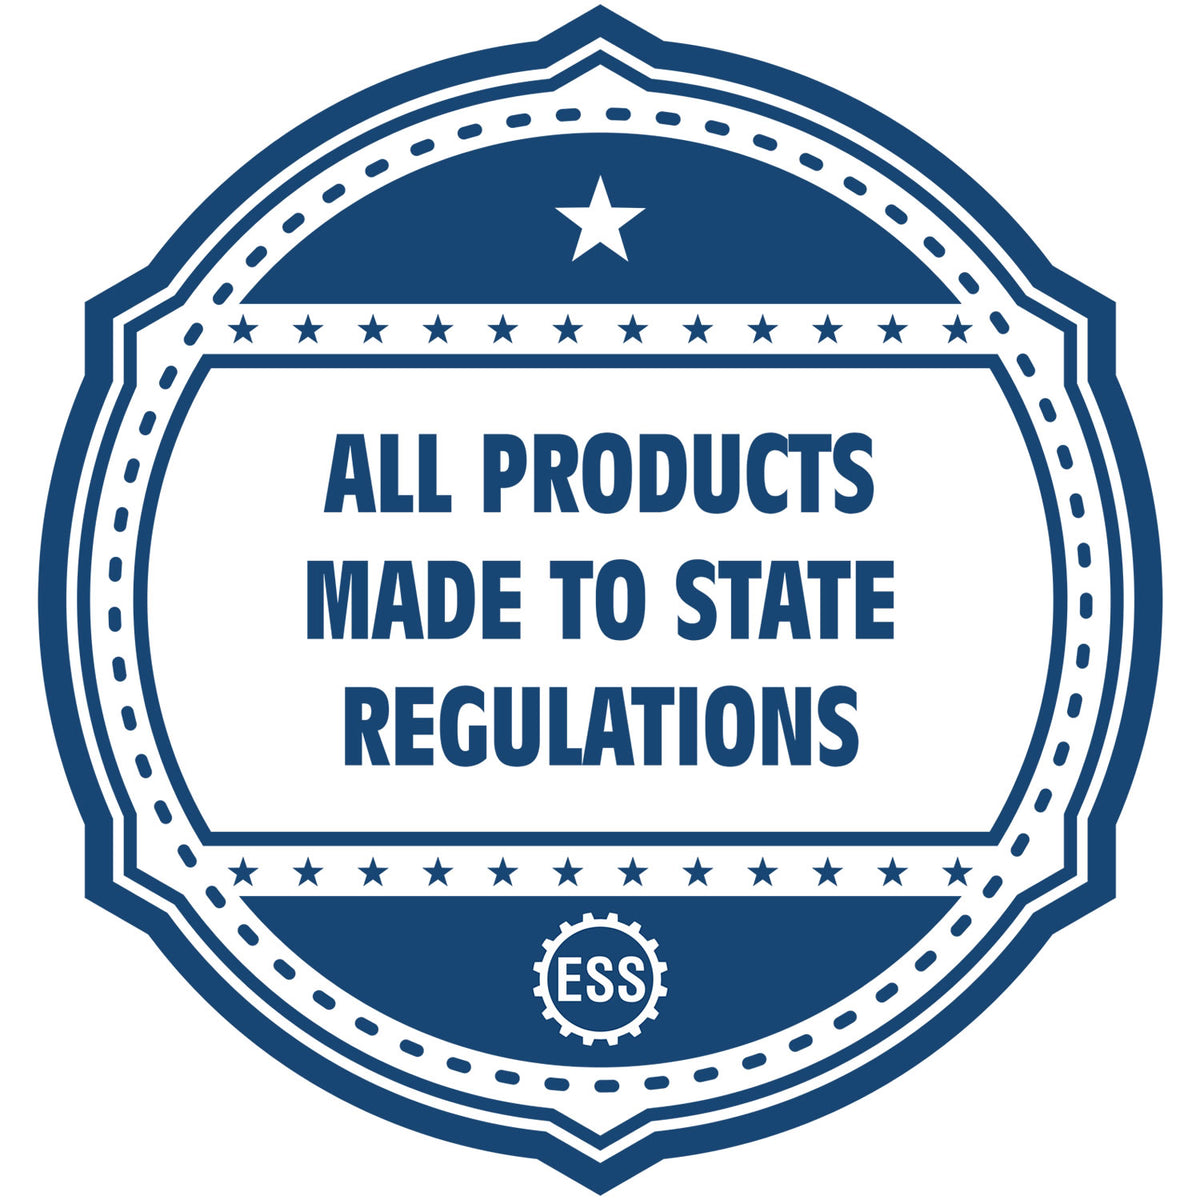 An icon or badge element for the Slim Pre-Inked Michigan Architect Seal Stamp showing that this product is made in compliance with state regulations.